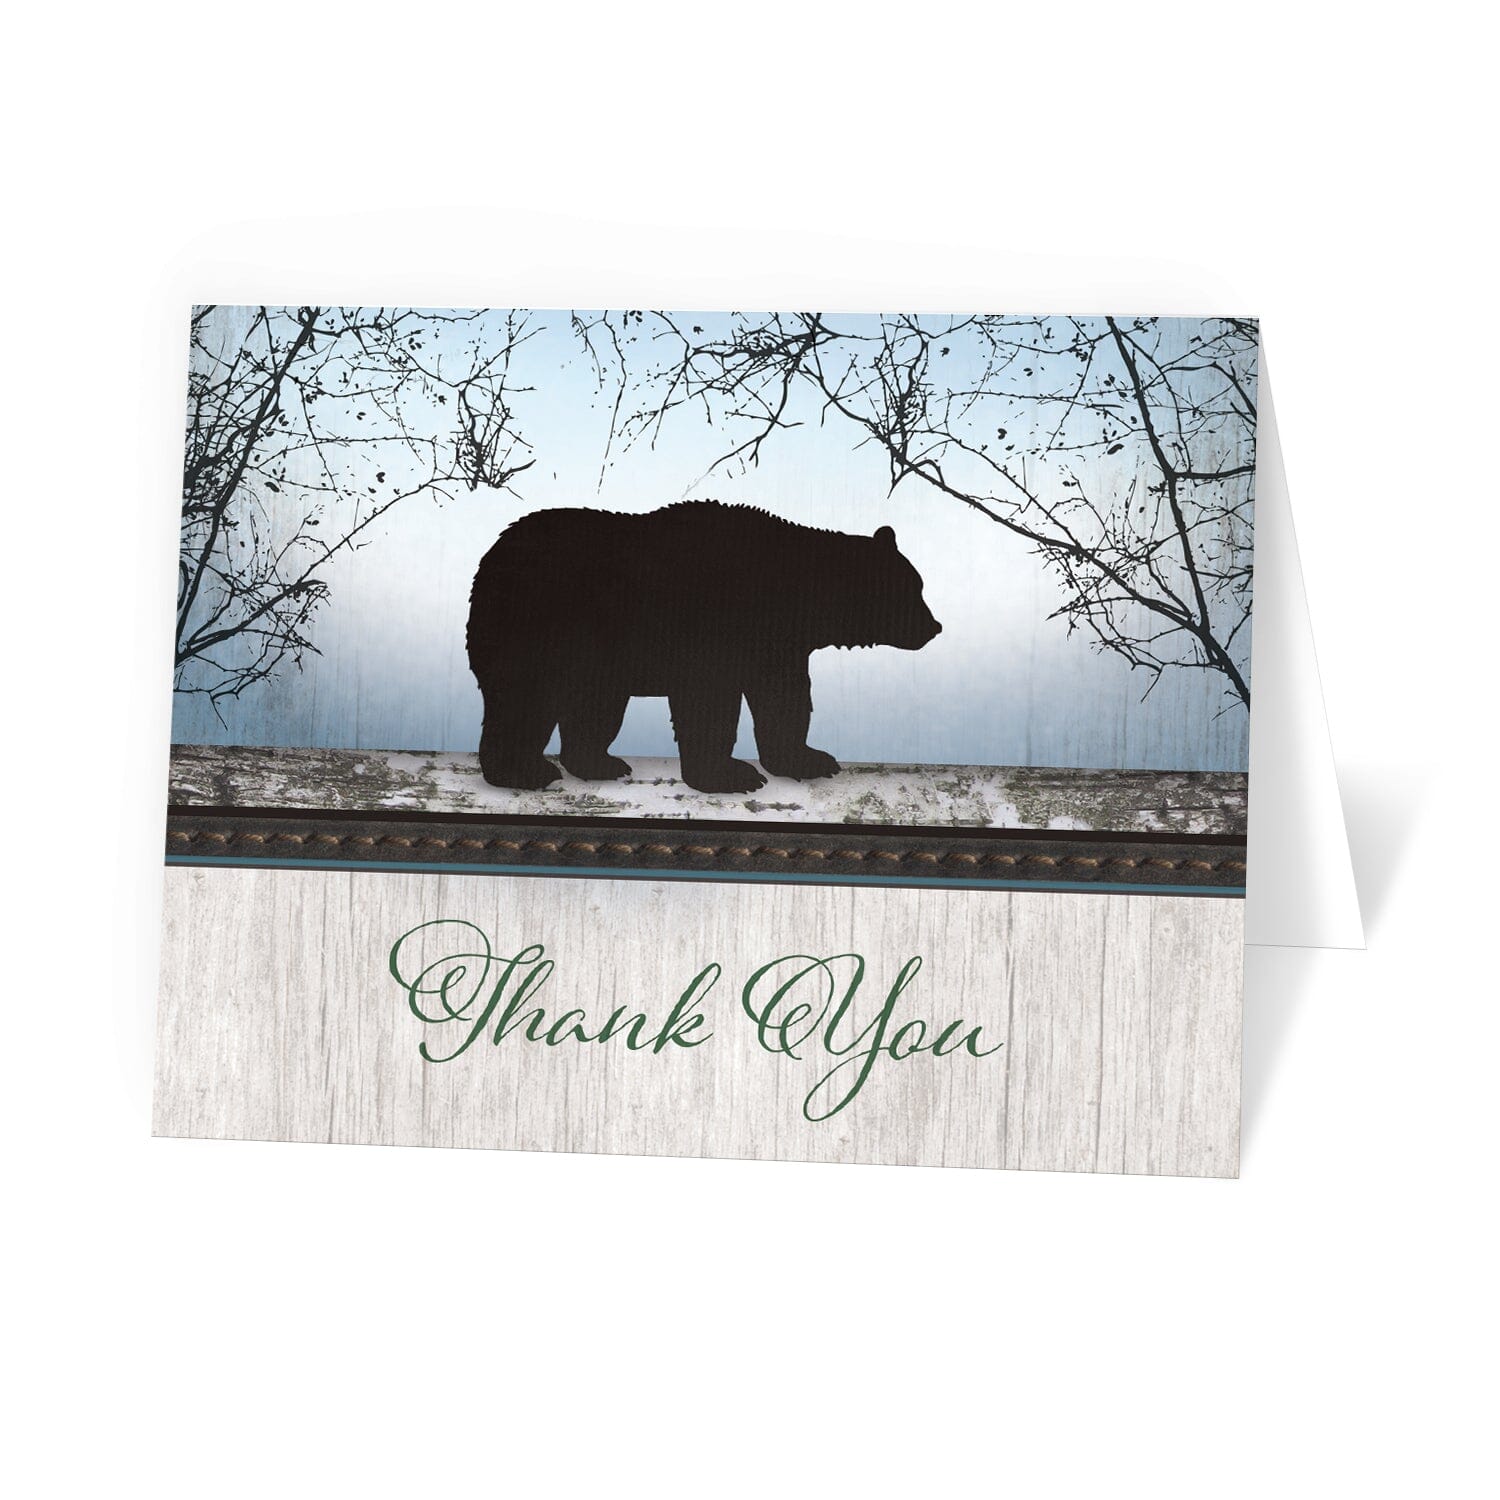 Rustic Bear Wood Green Blue Thank You Cards at Artistically Invited.